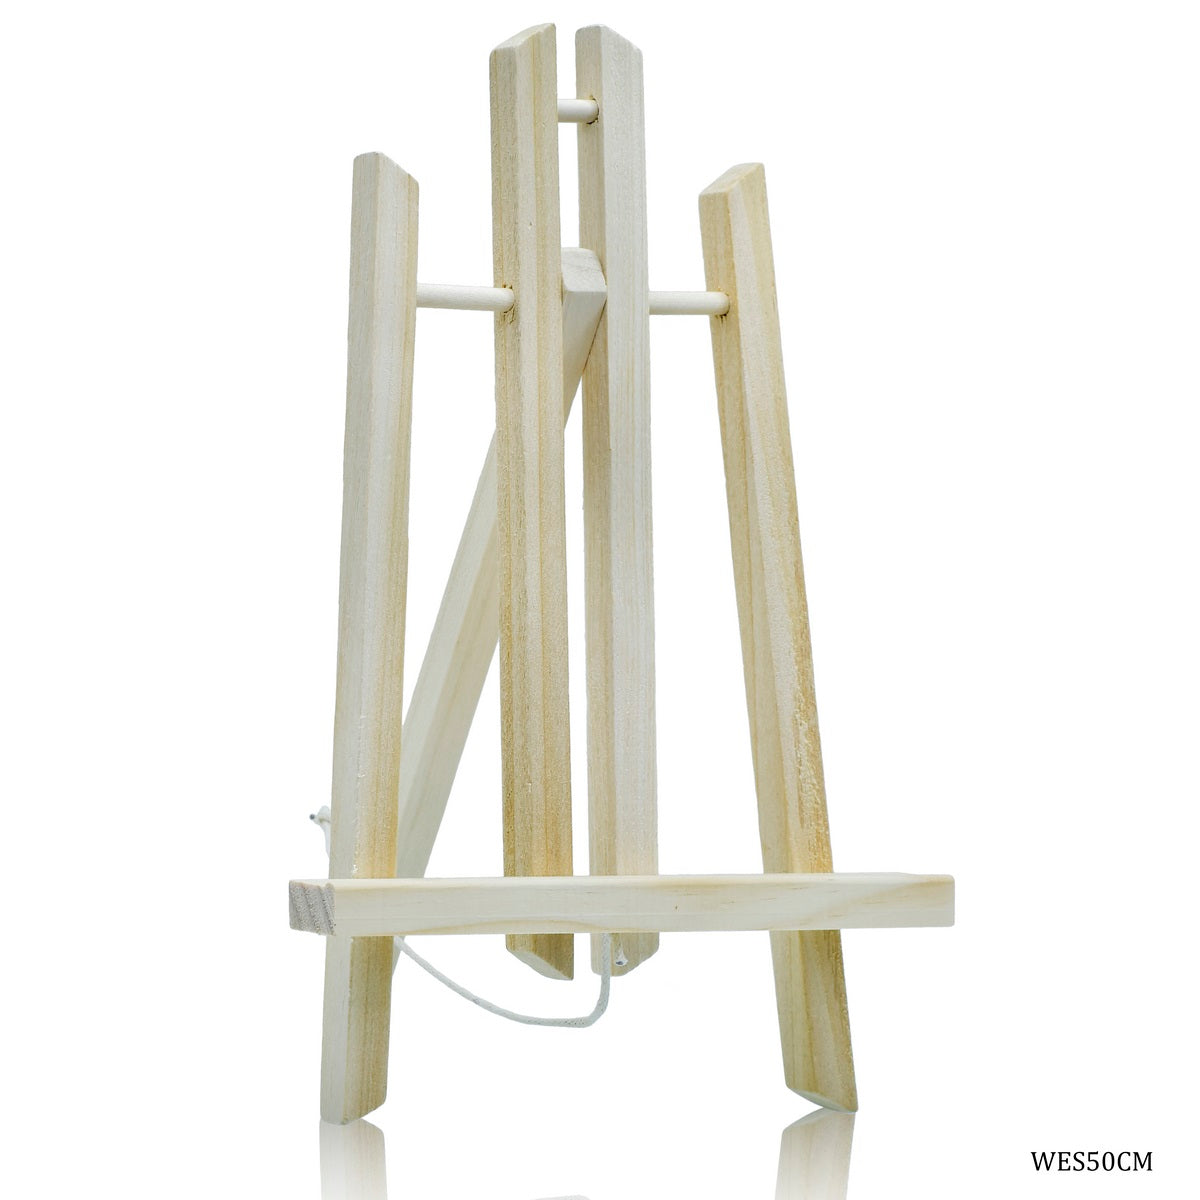 jags-mumbai Easel Wooden Easel Stand 19 Inch Big 50CM WES50CM